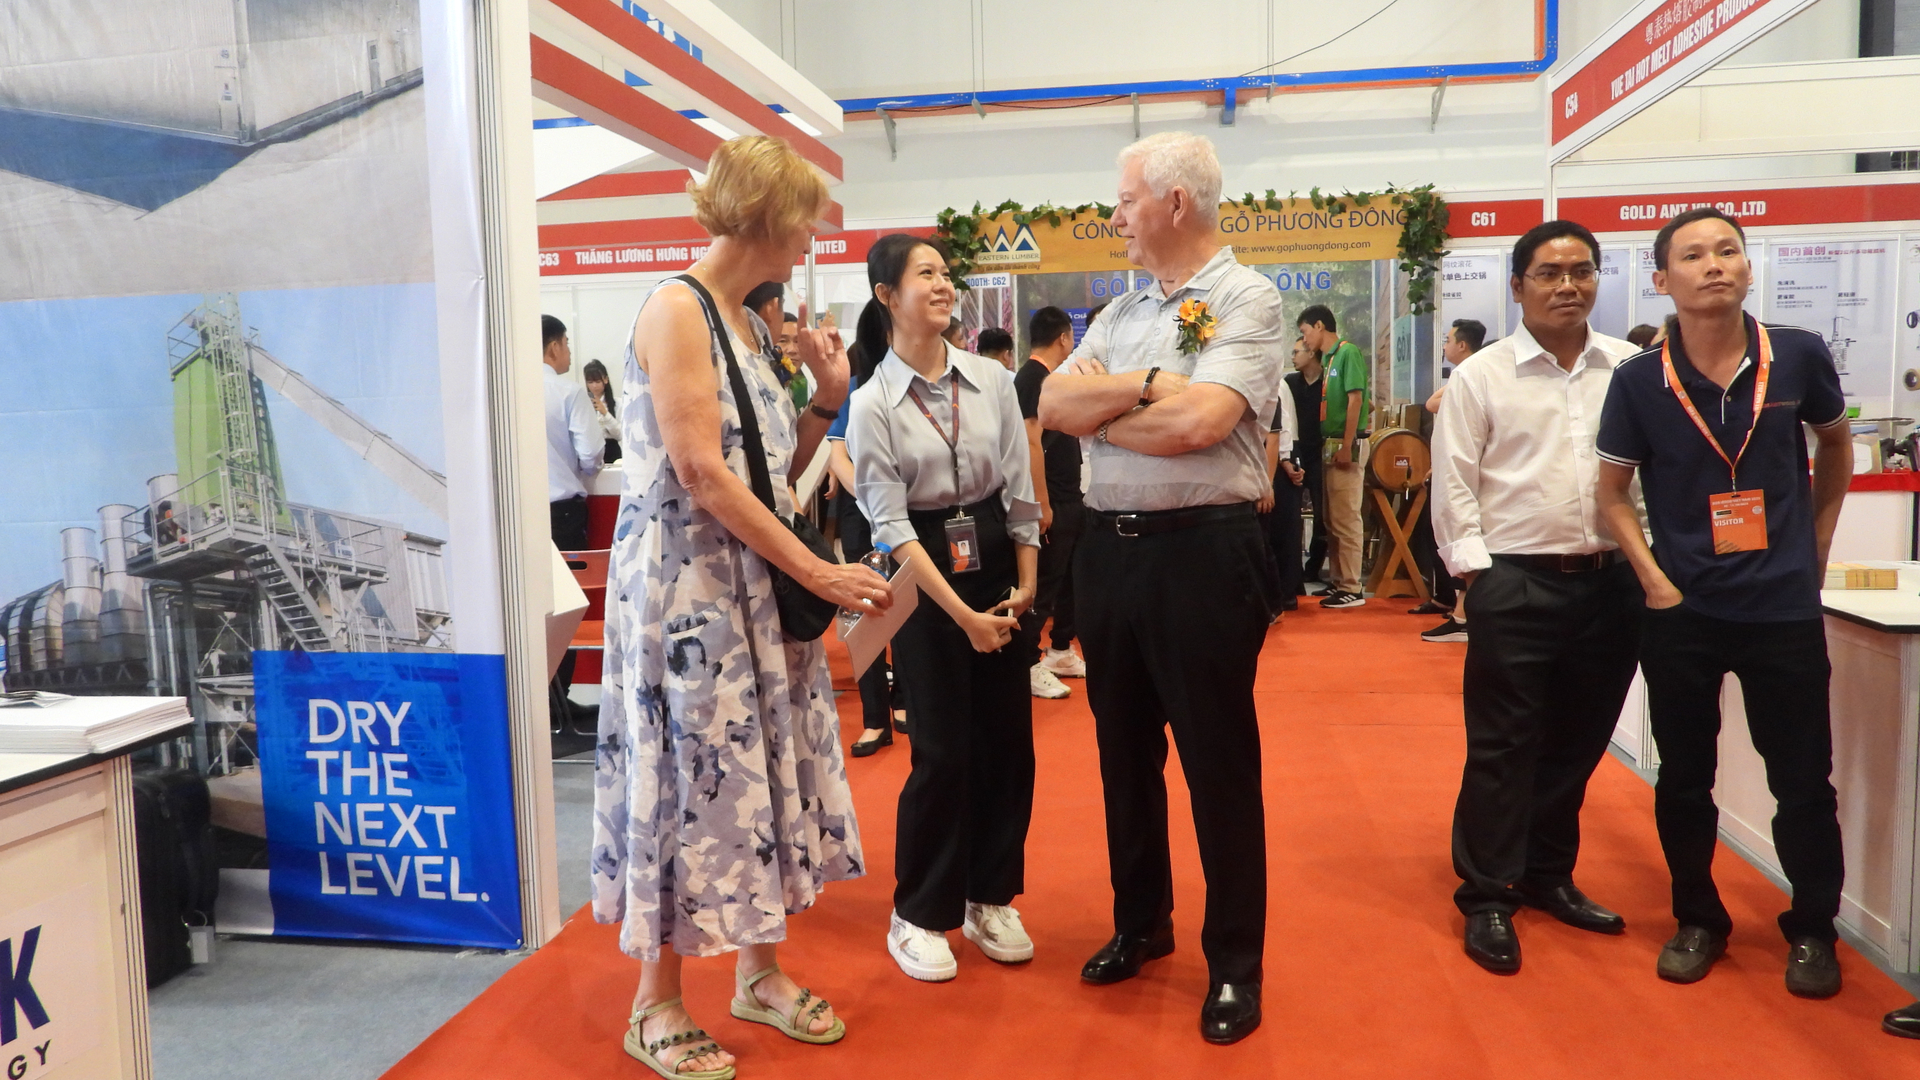 Representatives of businesses meet and exchange at the Fair. Photo: Tran Trung.